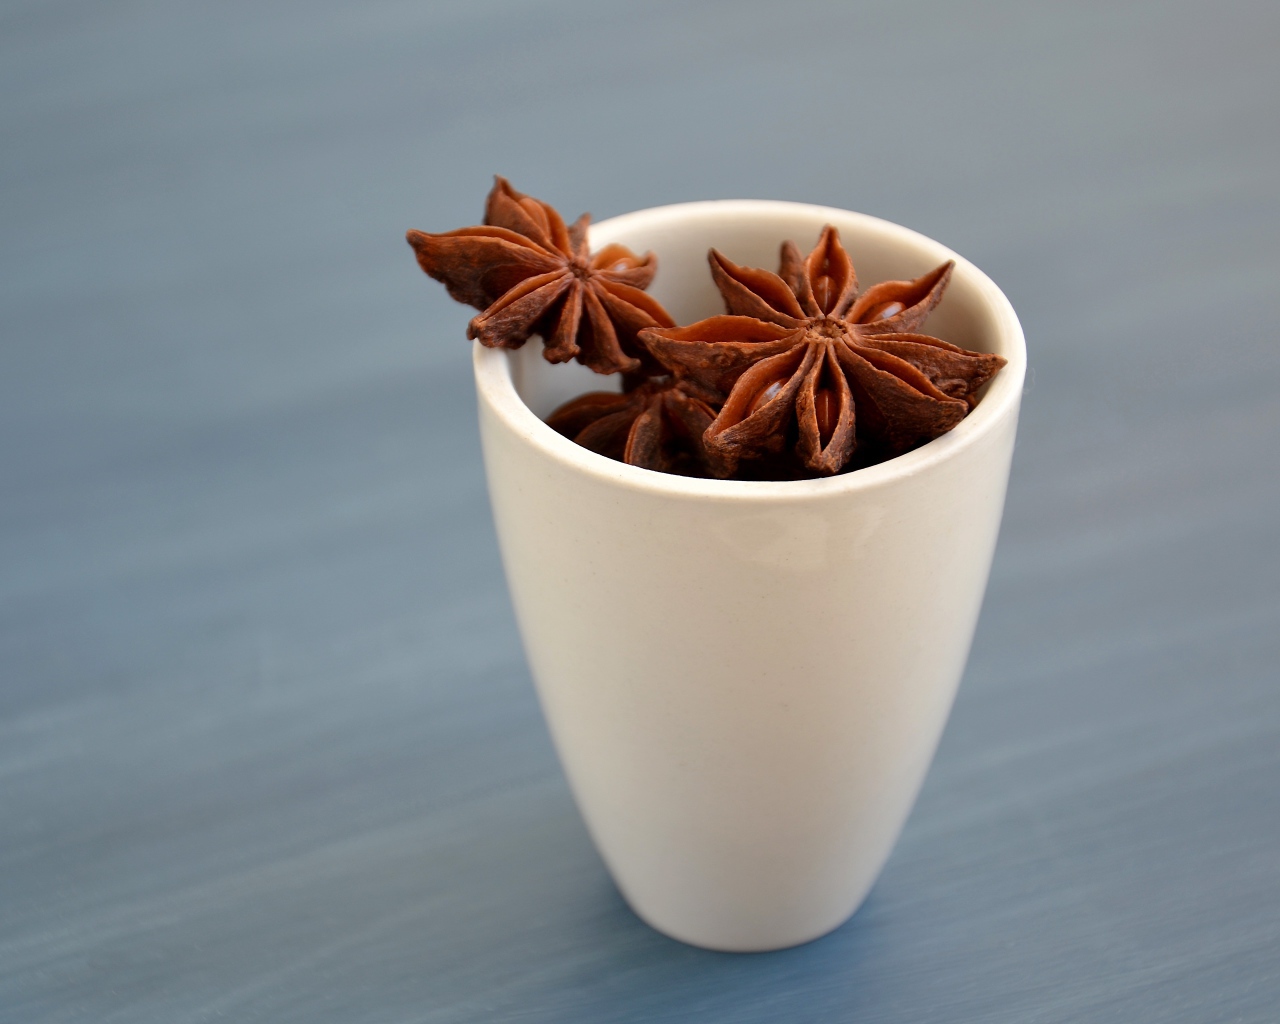 Star anise stars in a white cup on the table